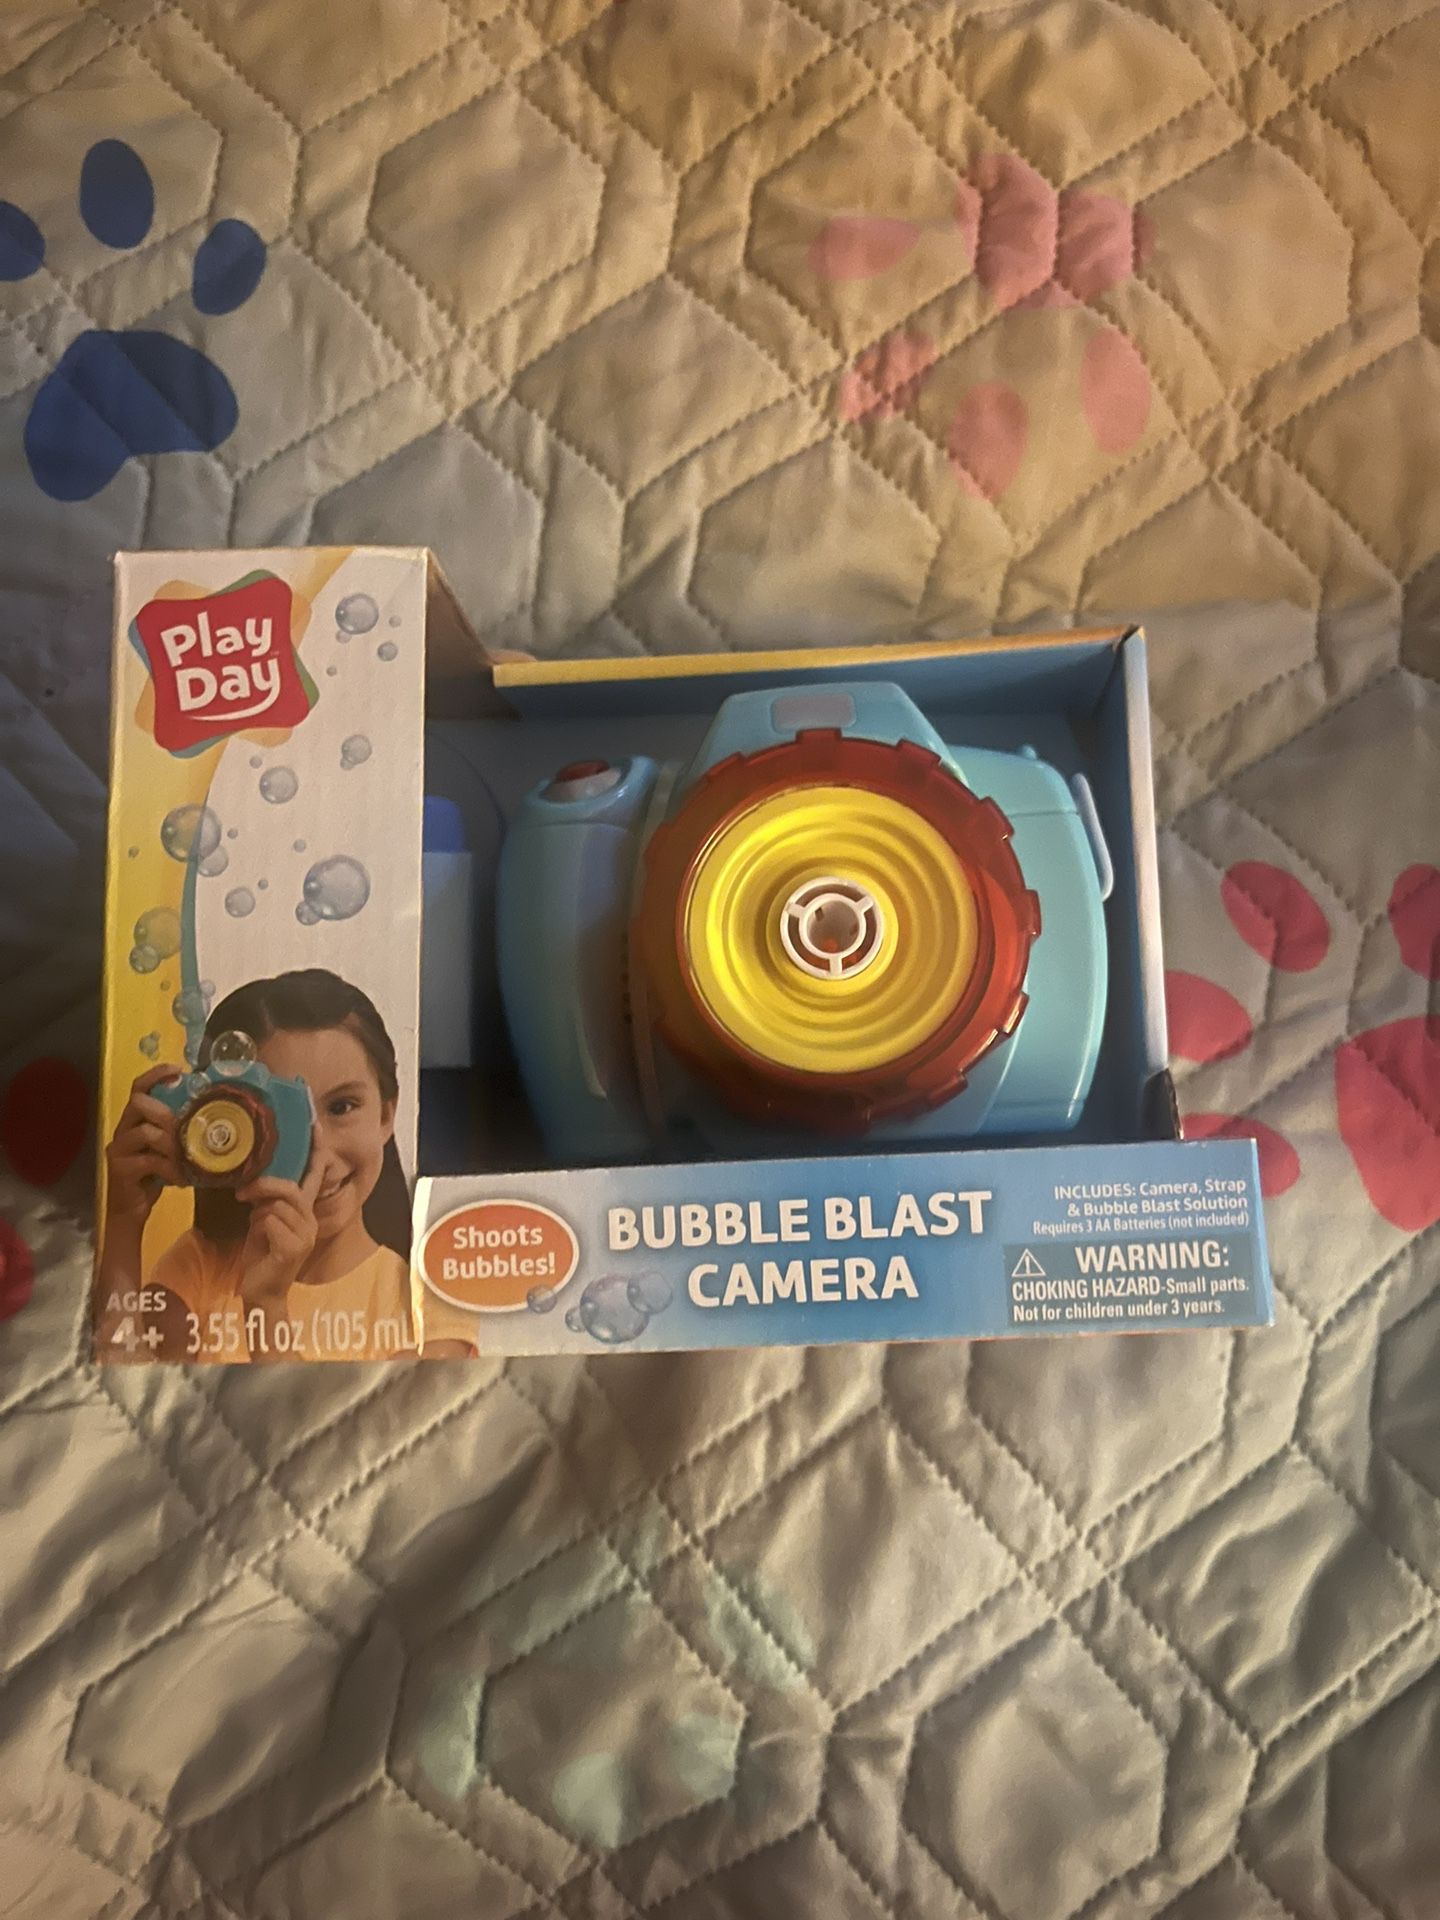 Play Day Bubble Blast Camera Toy Shoots Bubbles Ages 4+ PRICED RIGHT Brand New